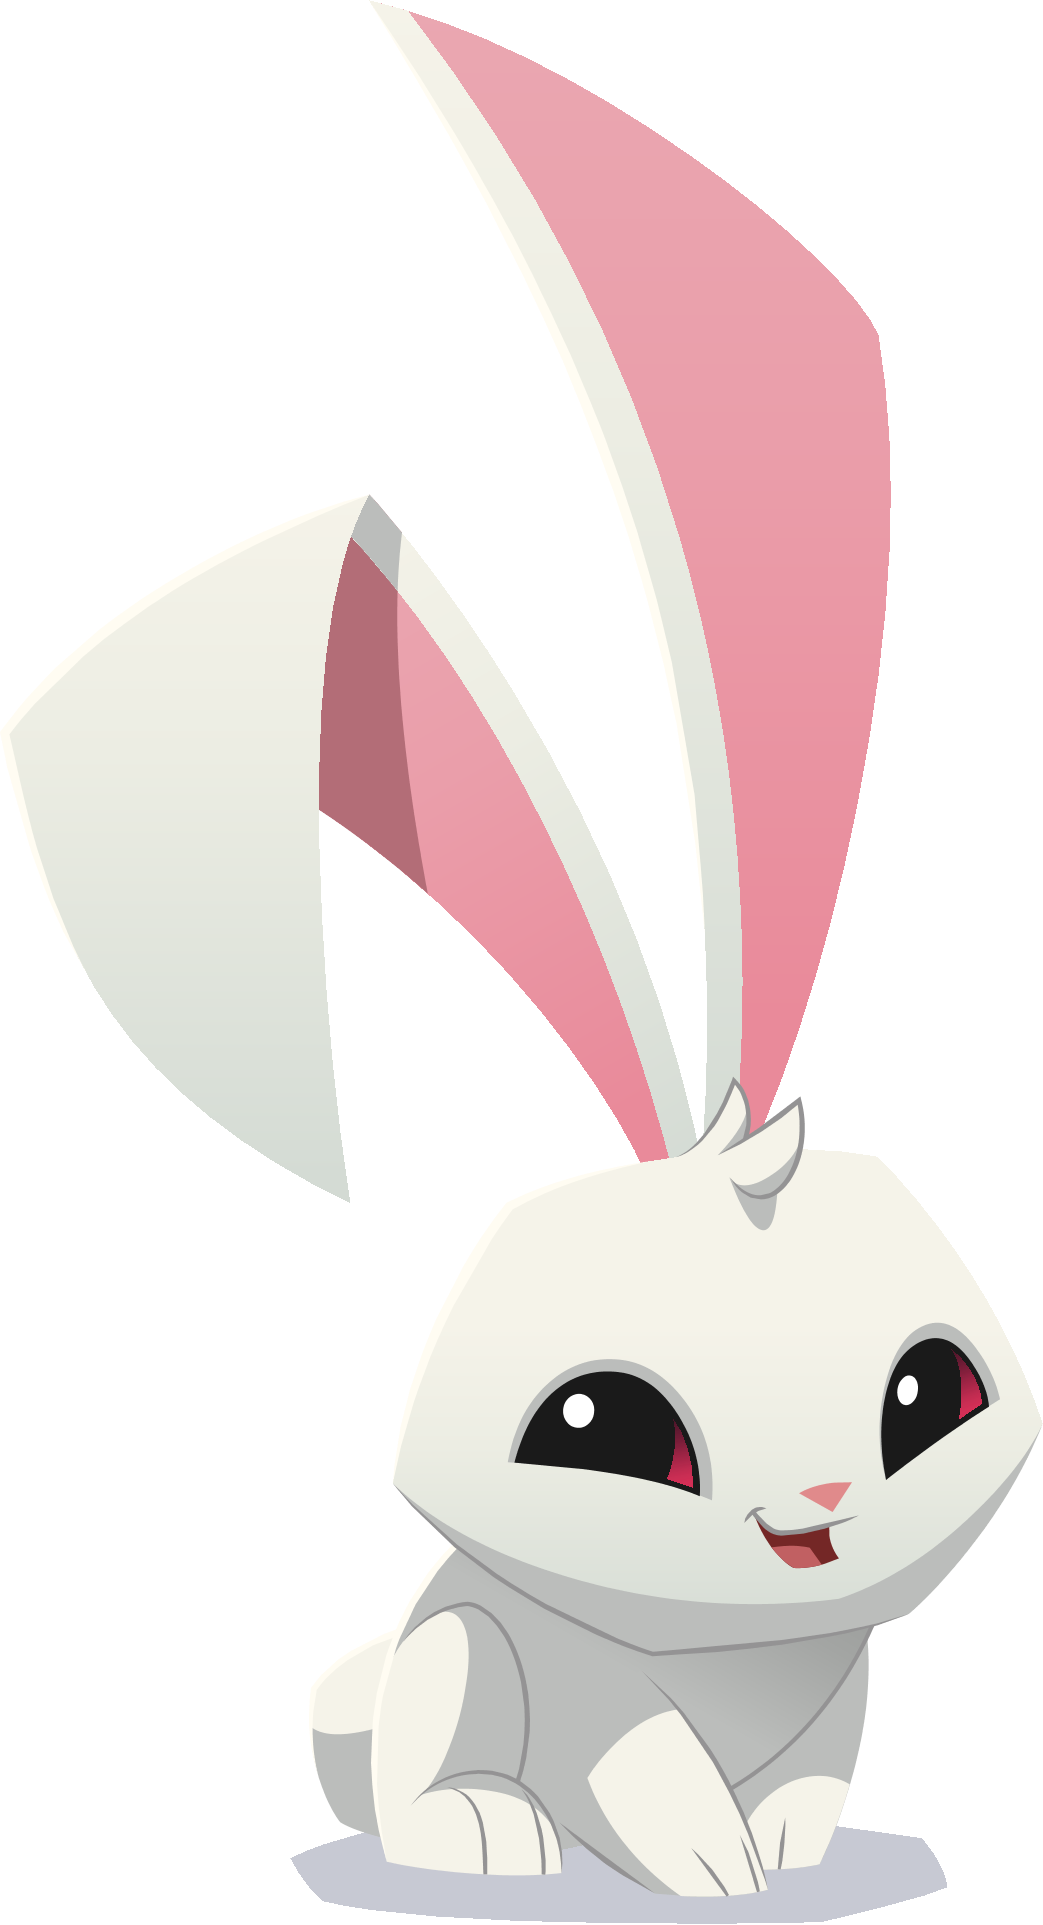 Clipart sleeping hare. Image bunnies png animal